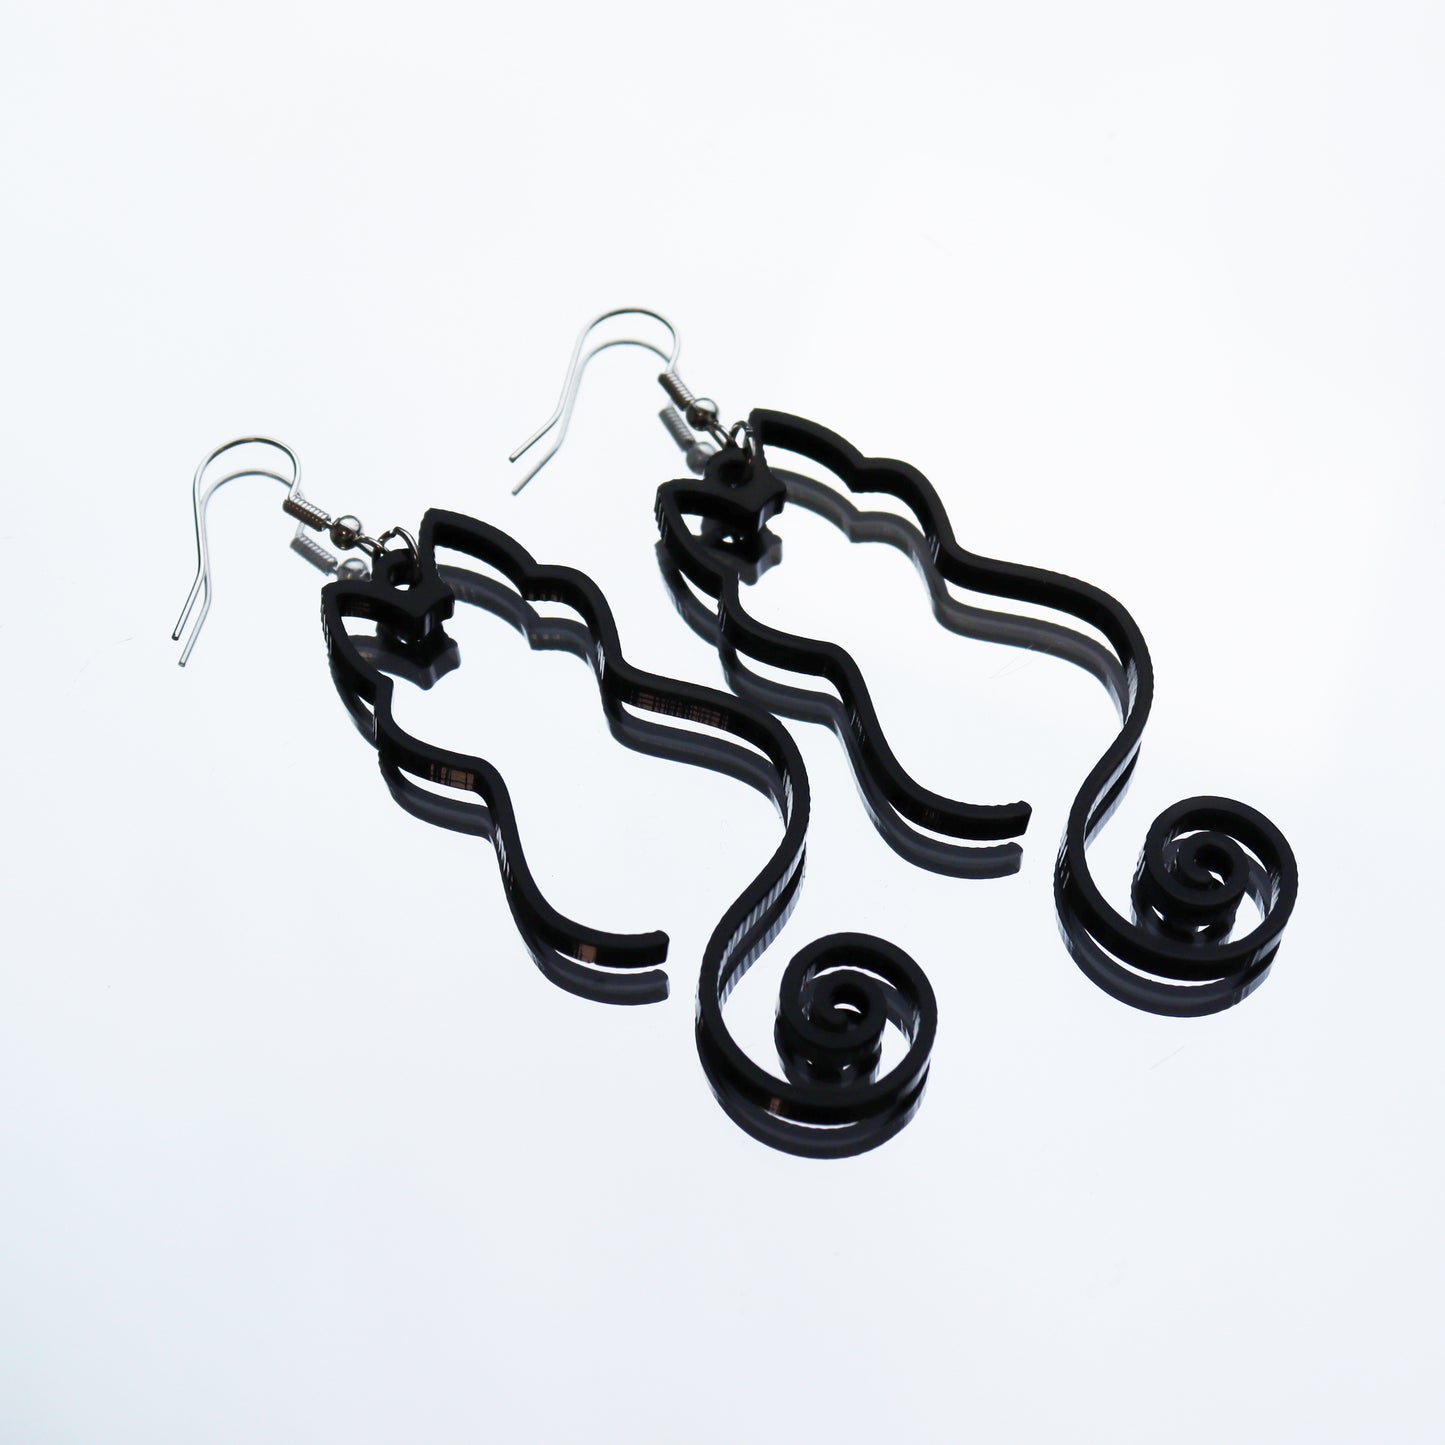 black cat silhouette large hanging black acrylc statement earrings perfect for halloween shown on mirror backing